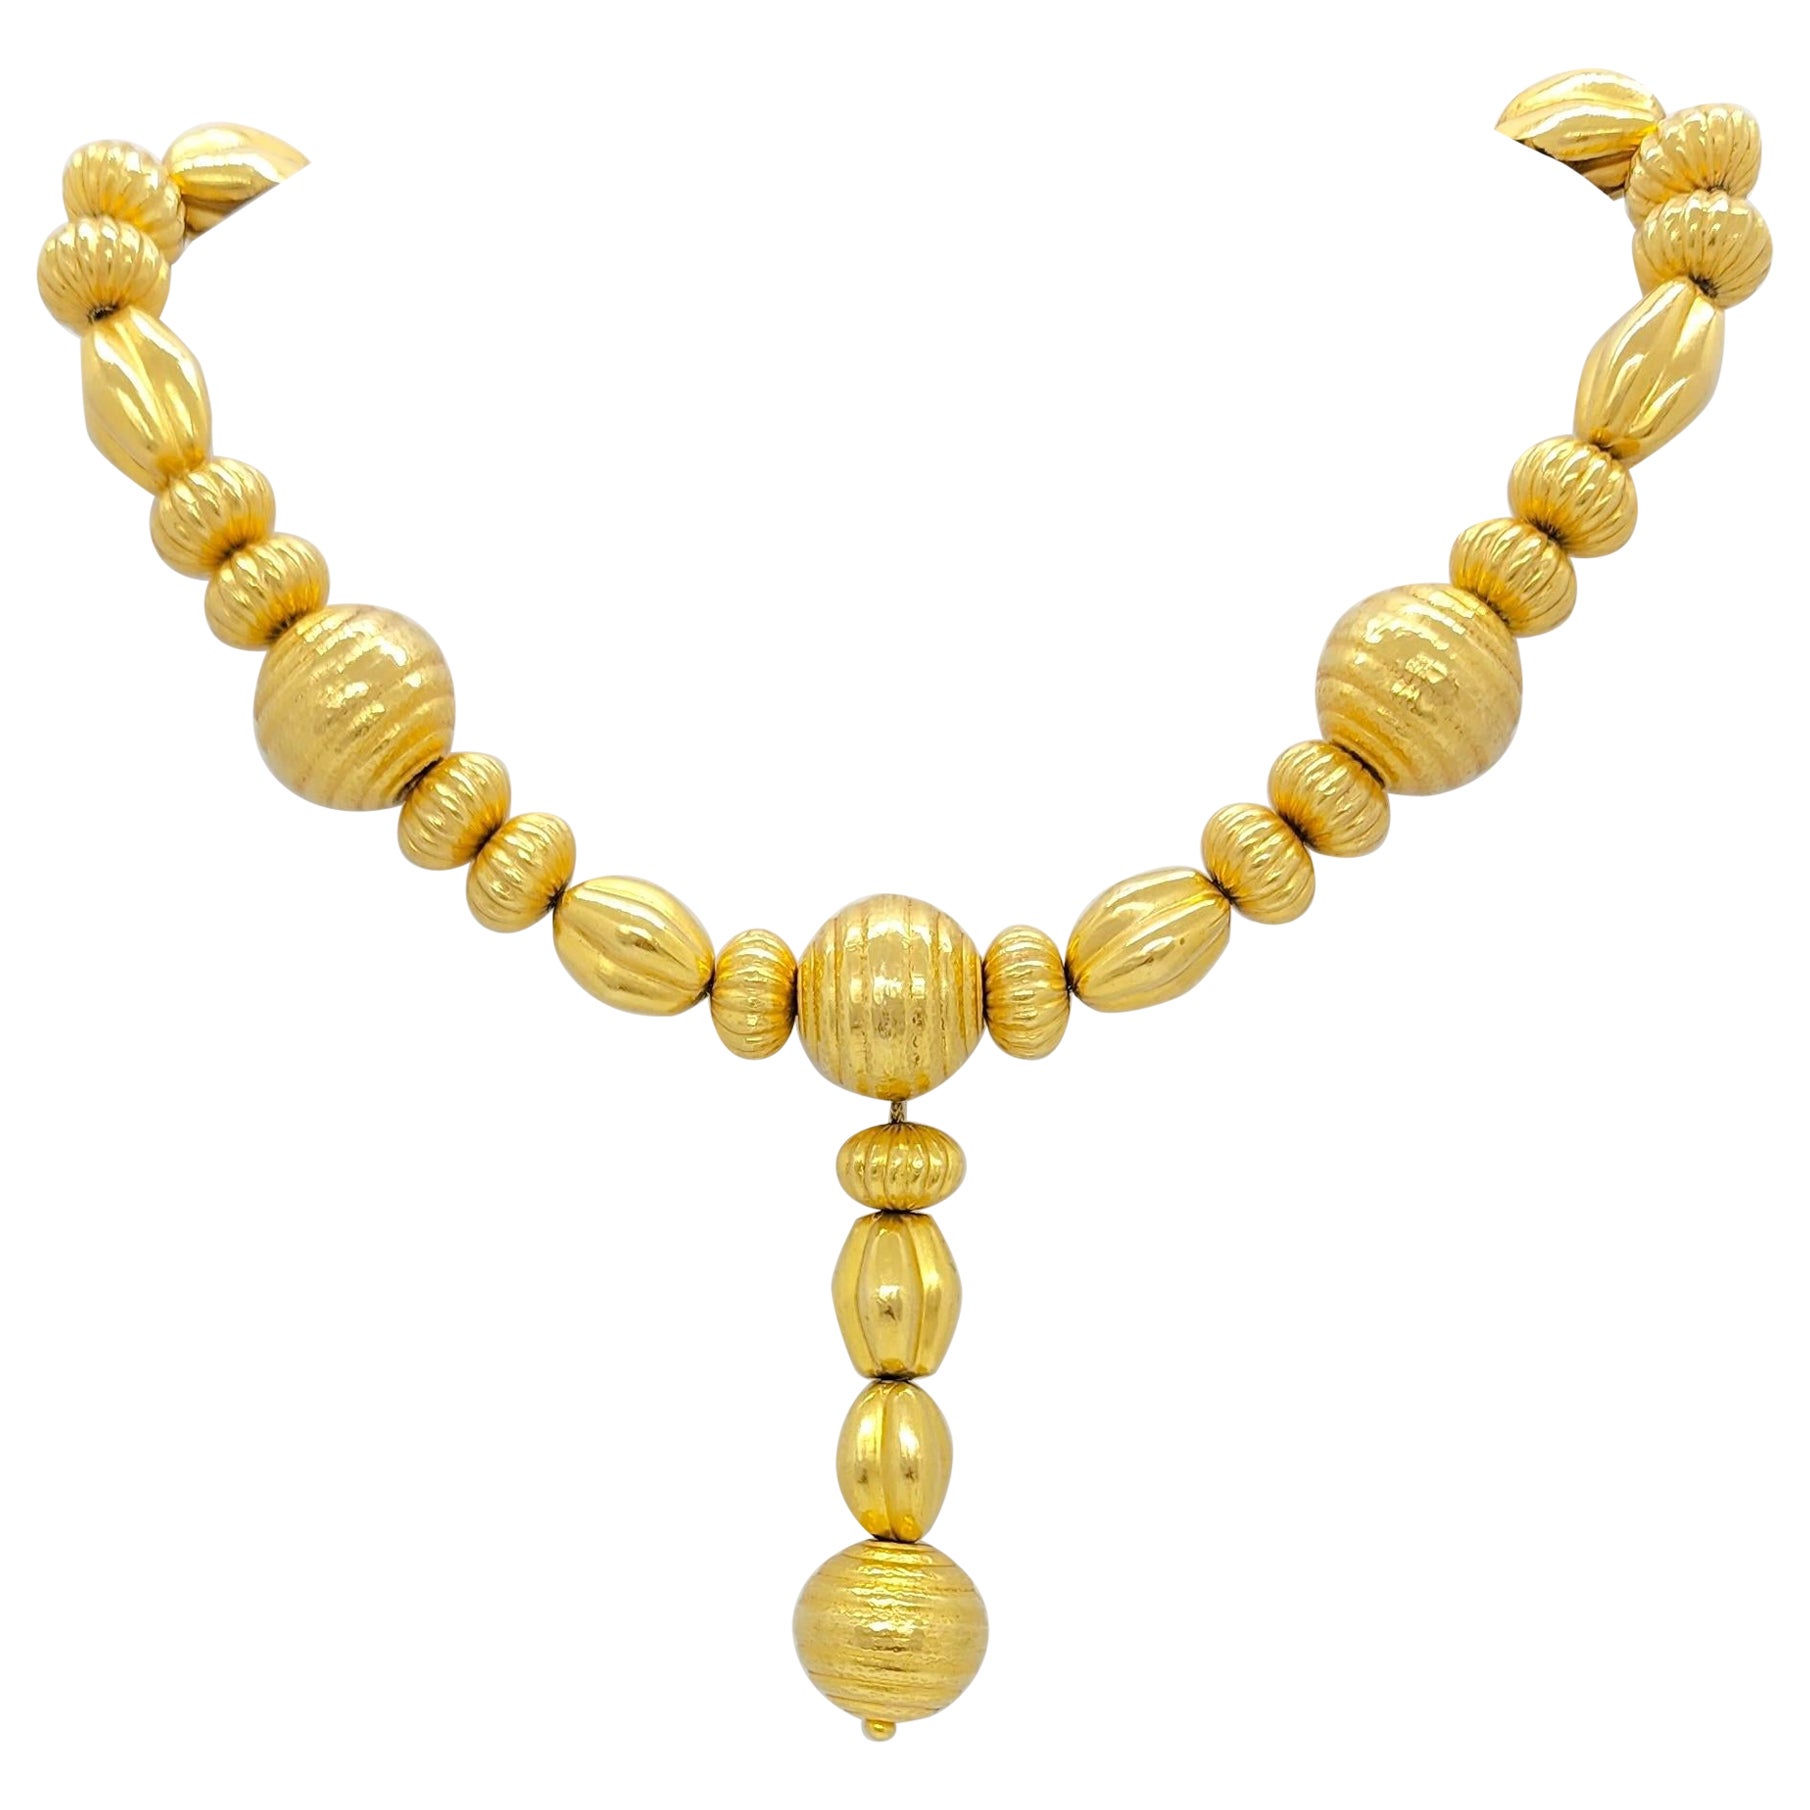 Estate Lalaounis Necklace in 18k Yellow Gold